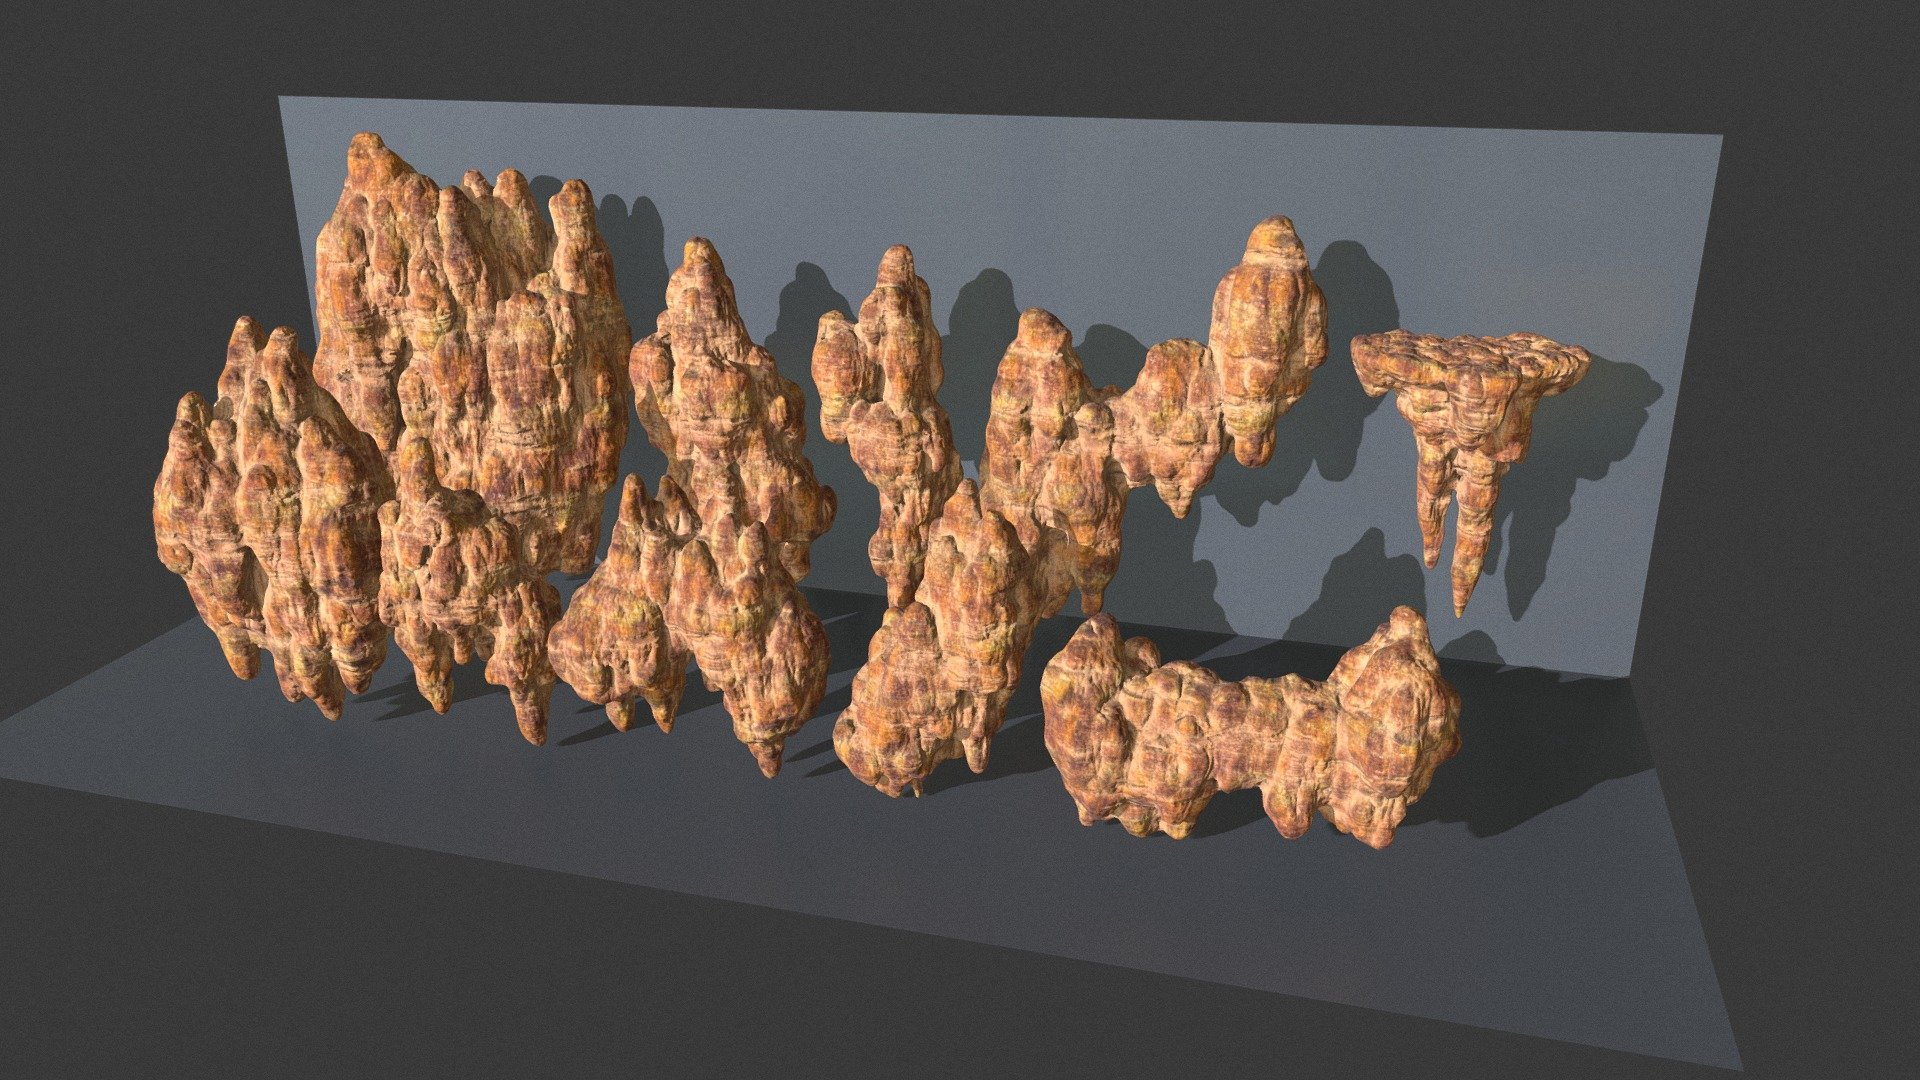 Package Overview:

There are 10 shapes in this package

1/Poly count:

Cave desert rock 01: 8000 polys. Cave desert rock 02: 8000 polys. Cave desert rock 03: 10000 polys. Cave desert rock 04: 10000 polys. Cave desert rock 05: 5000 polys. Cave desert rock 06: 10000 polys. Cave desert rock 07: 5000 polys. Cave desert rock 08: 8000 polys. Cave desert rock 09: 8000 polys. Cave desert rock 10: 10000 polys.

2/Texture:

4096x4096 (Color, Normal, Roughness, Ambient Occlusion)

3/Format:

3Dsmax 2017, Fbx, Obj

4/Product Features:

High-quality textures, including basic channels, are suitable for all projects (movies or games) and any software or render engines.

Very pleased if my product is useful for your work!

Thank you for your interest!

cave cliff exterior damaged landscape mountain mountains nature rock rocks desert stone stones cavern granite canyon damage - Low poly Desert Cave Modular Pack D 200828 - Buy Royalty Free 3D model by Mega 3D (@3dlandscape) 3d model